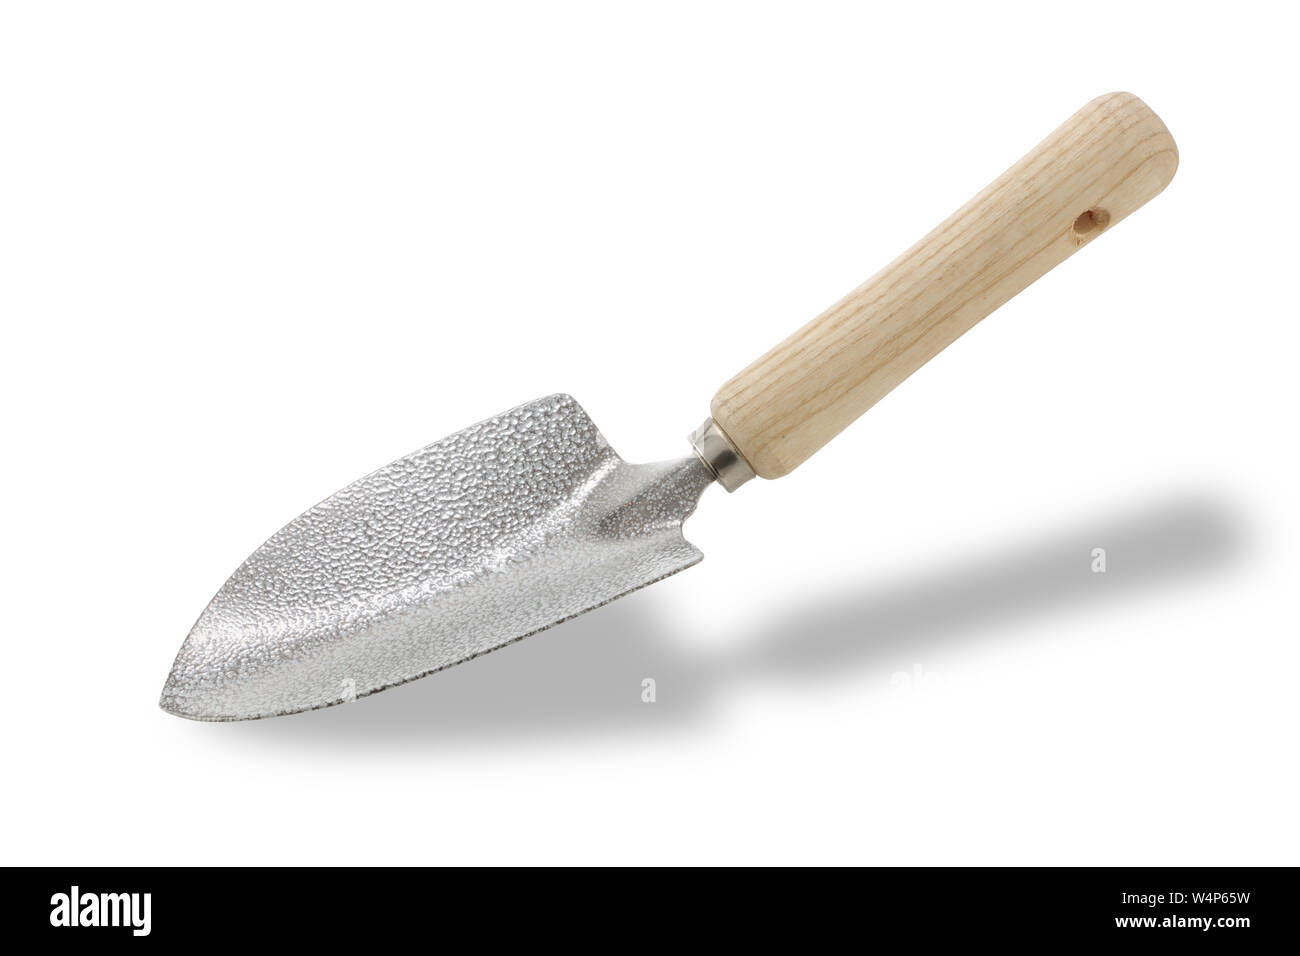 A garden trowel/spade isolated on white with shadow and clipping path Stock Photo